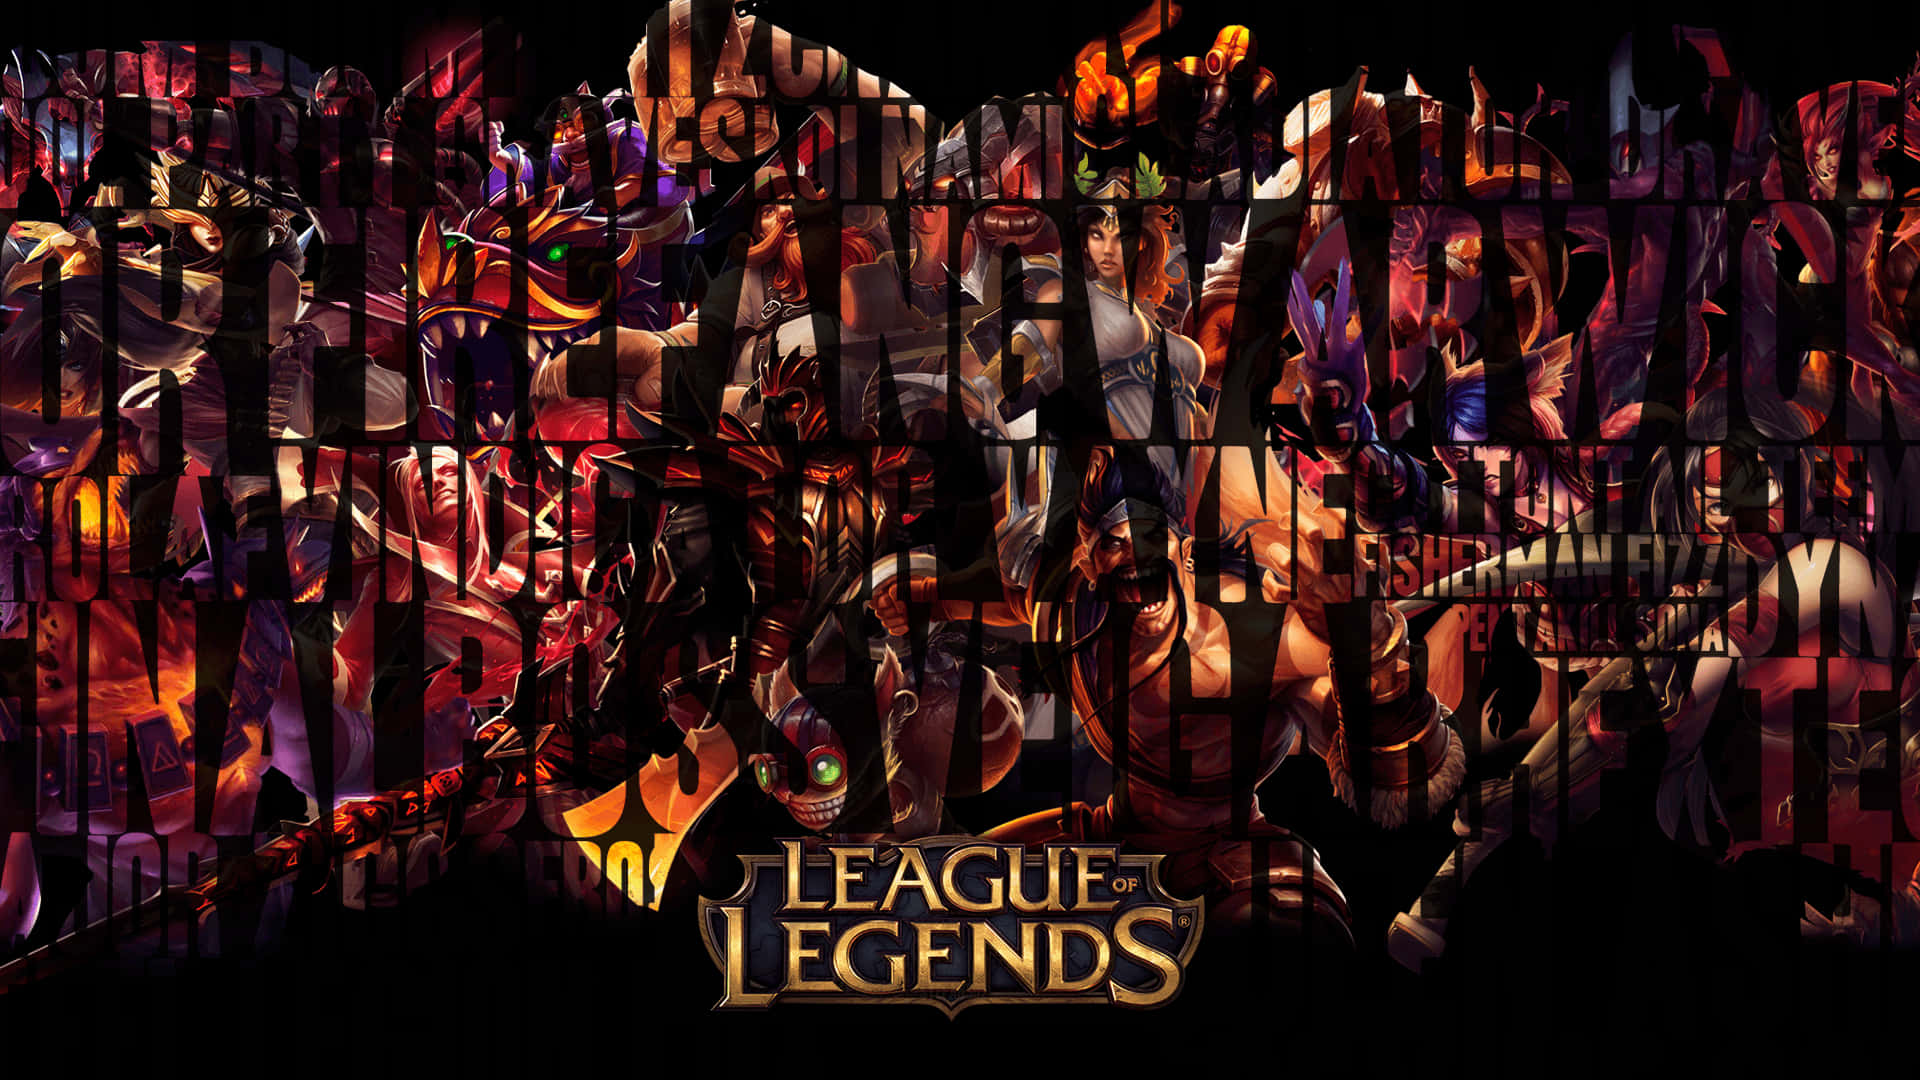 A player competes in the Championship Series - the premier competition in the world of League of Legends